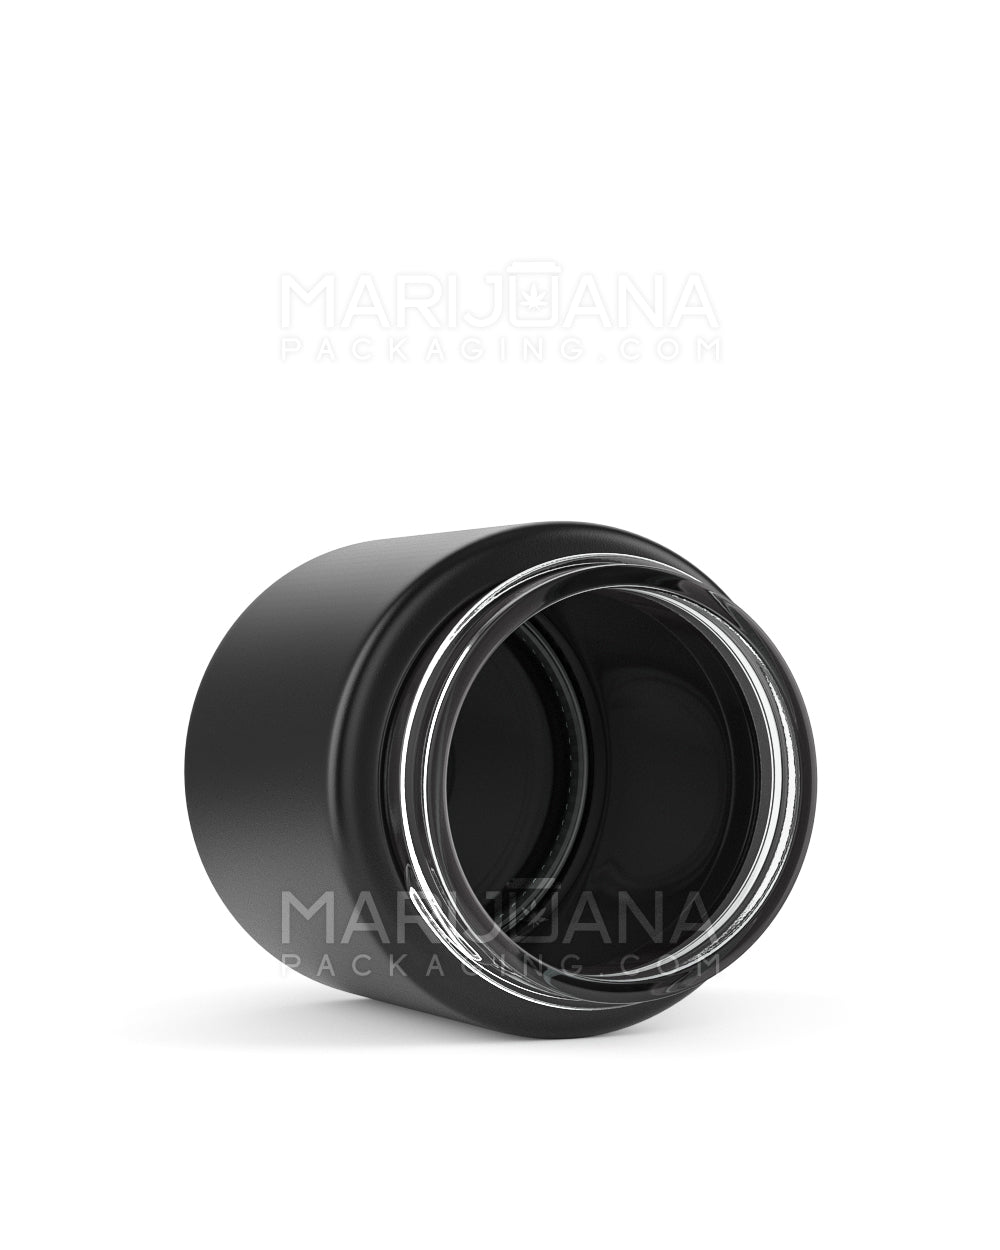 Straight Sided Matte Black Glass Jars | 50mm - 3oz - 100 Count - 3